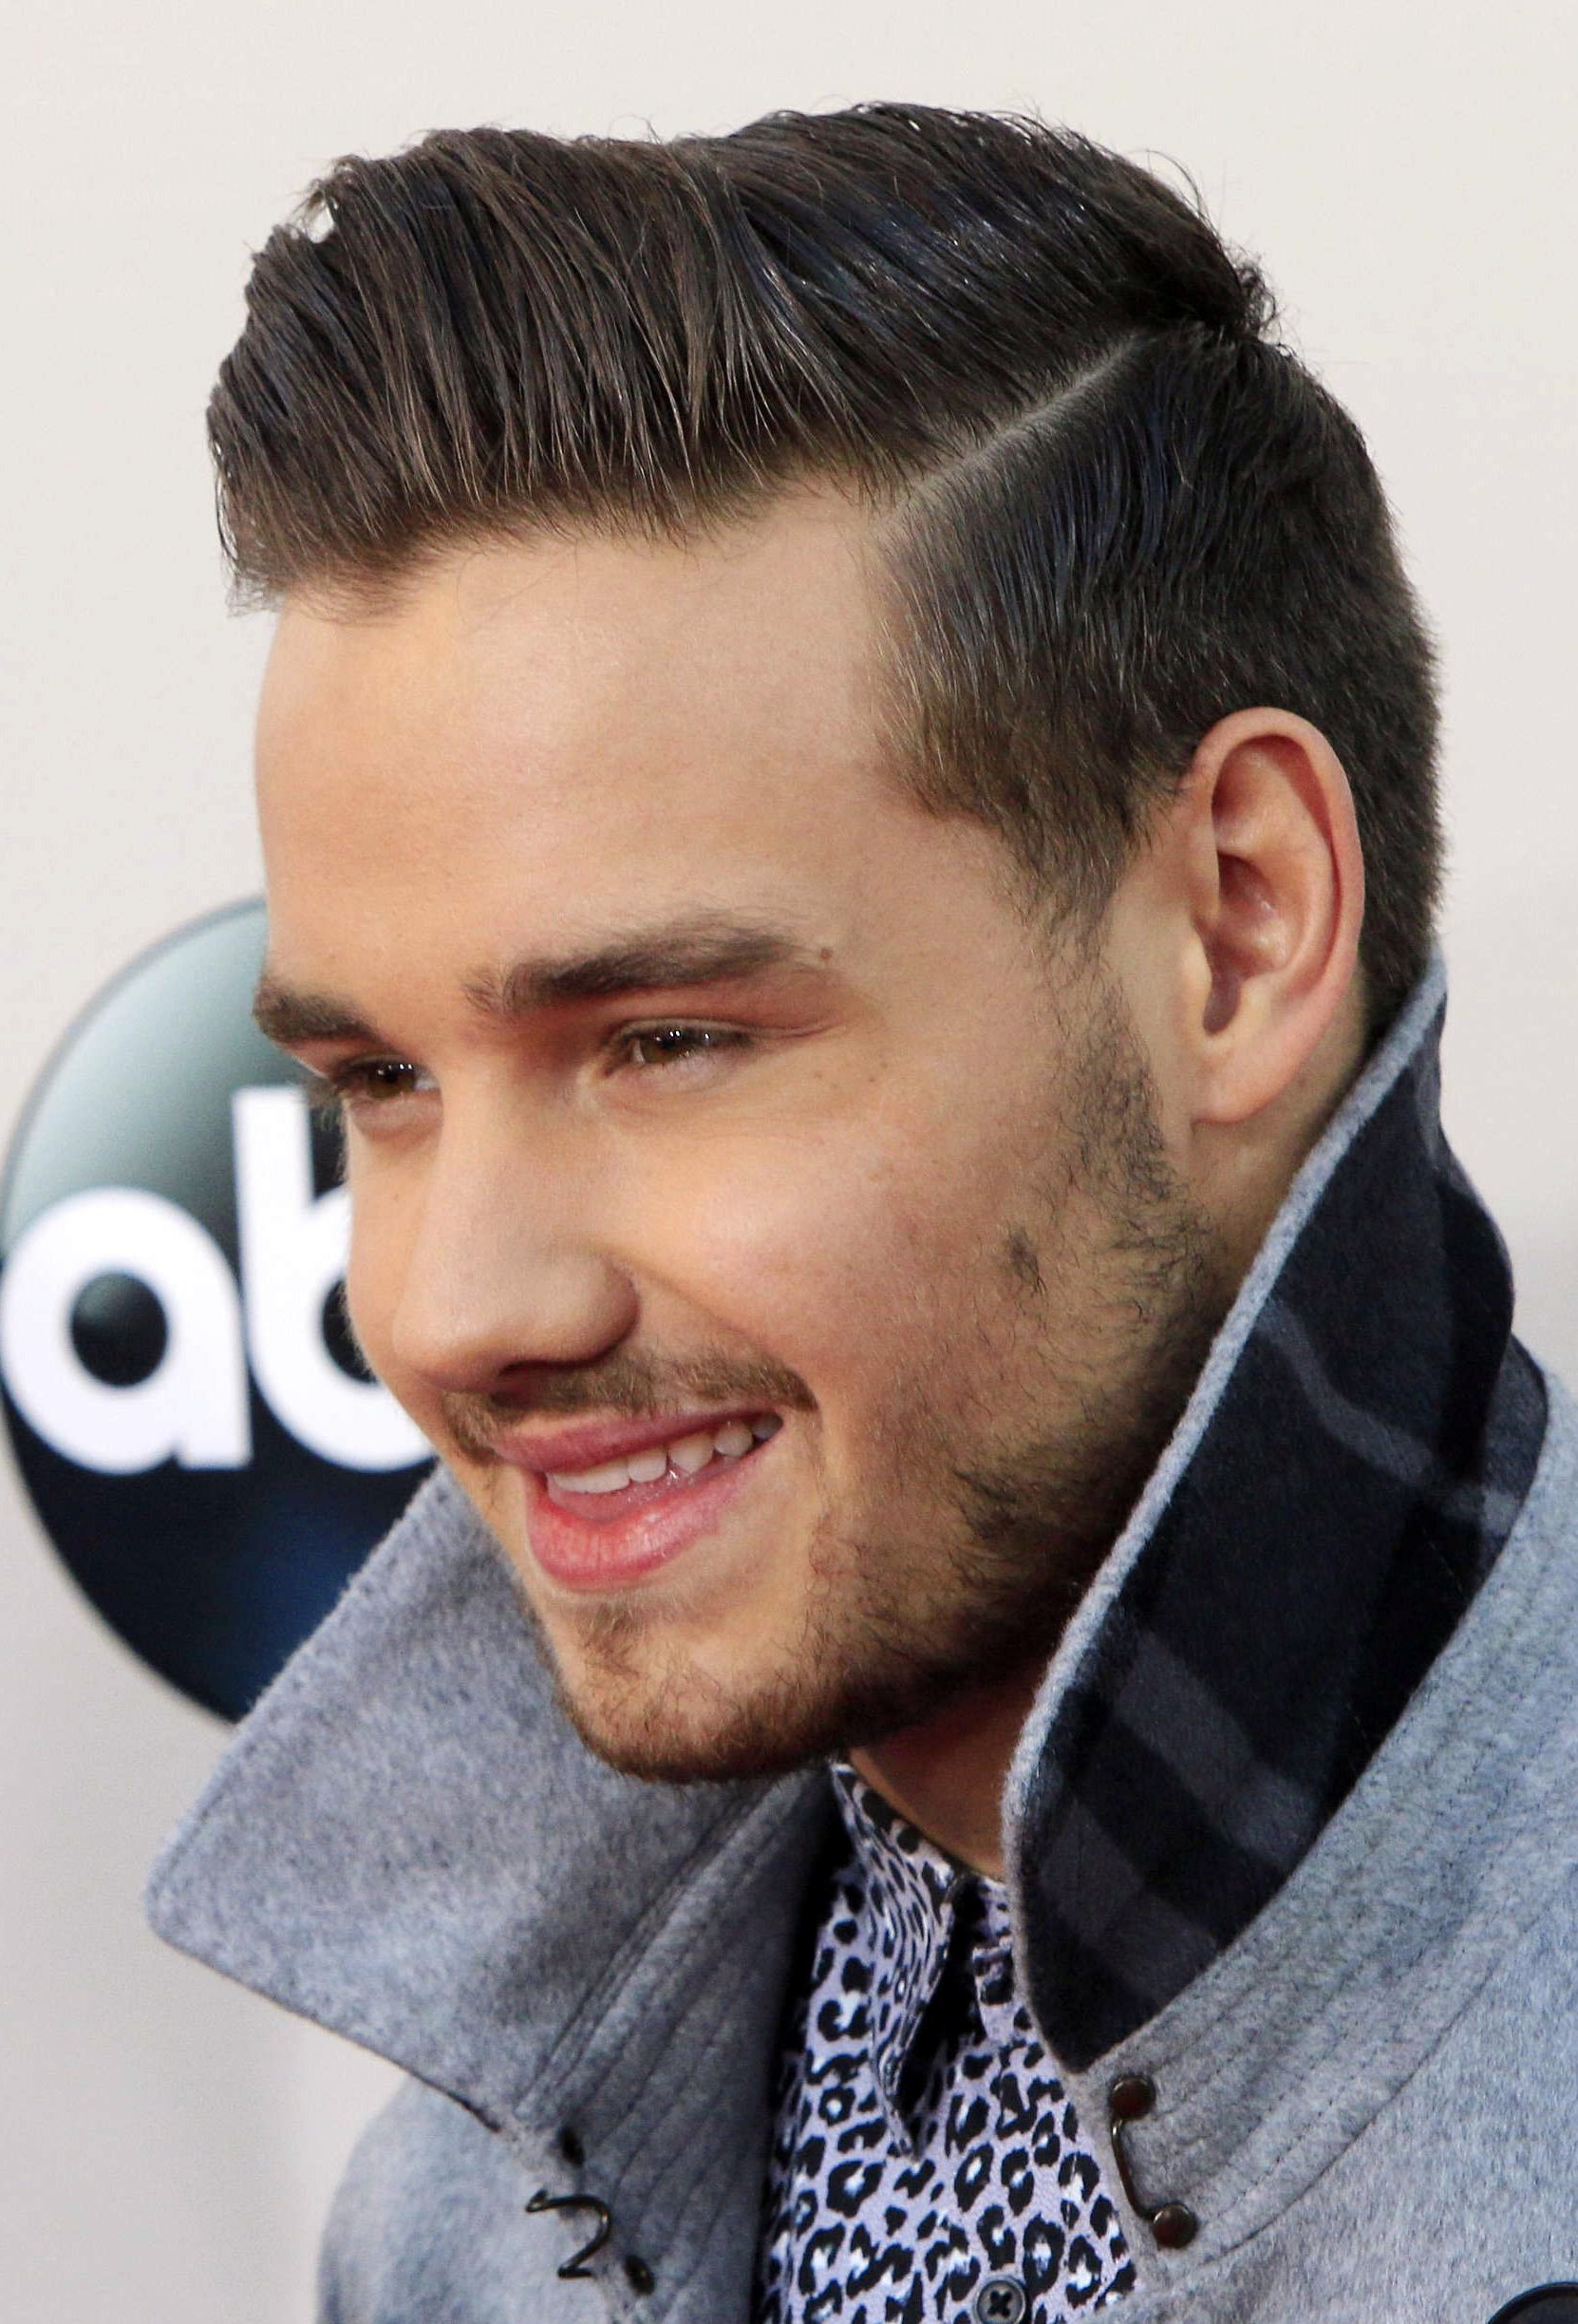 Liam Payne's Comb Over Hairstyle